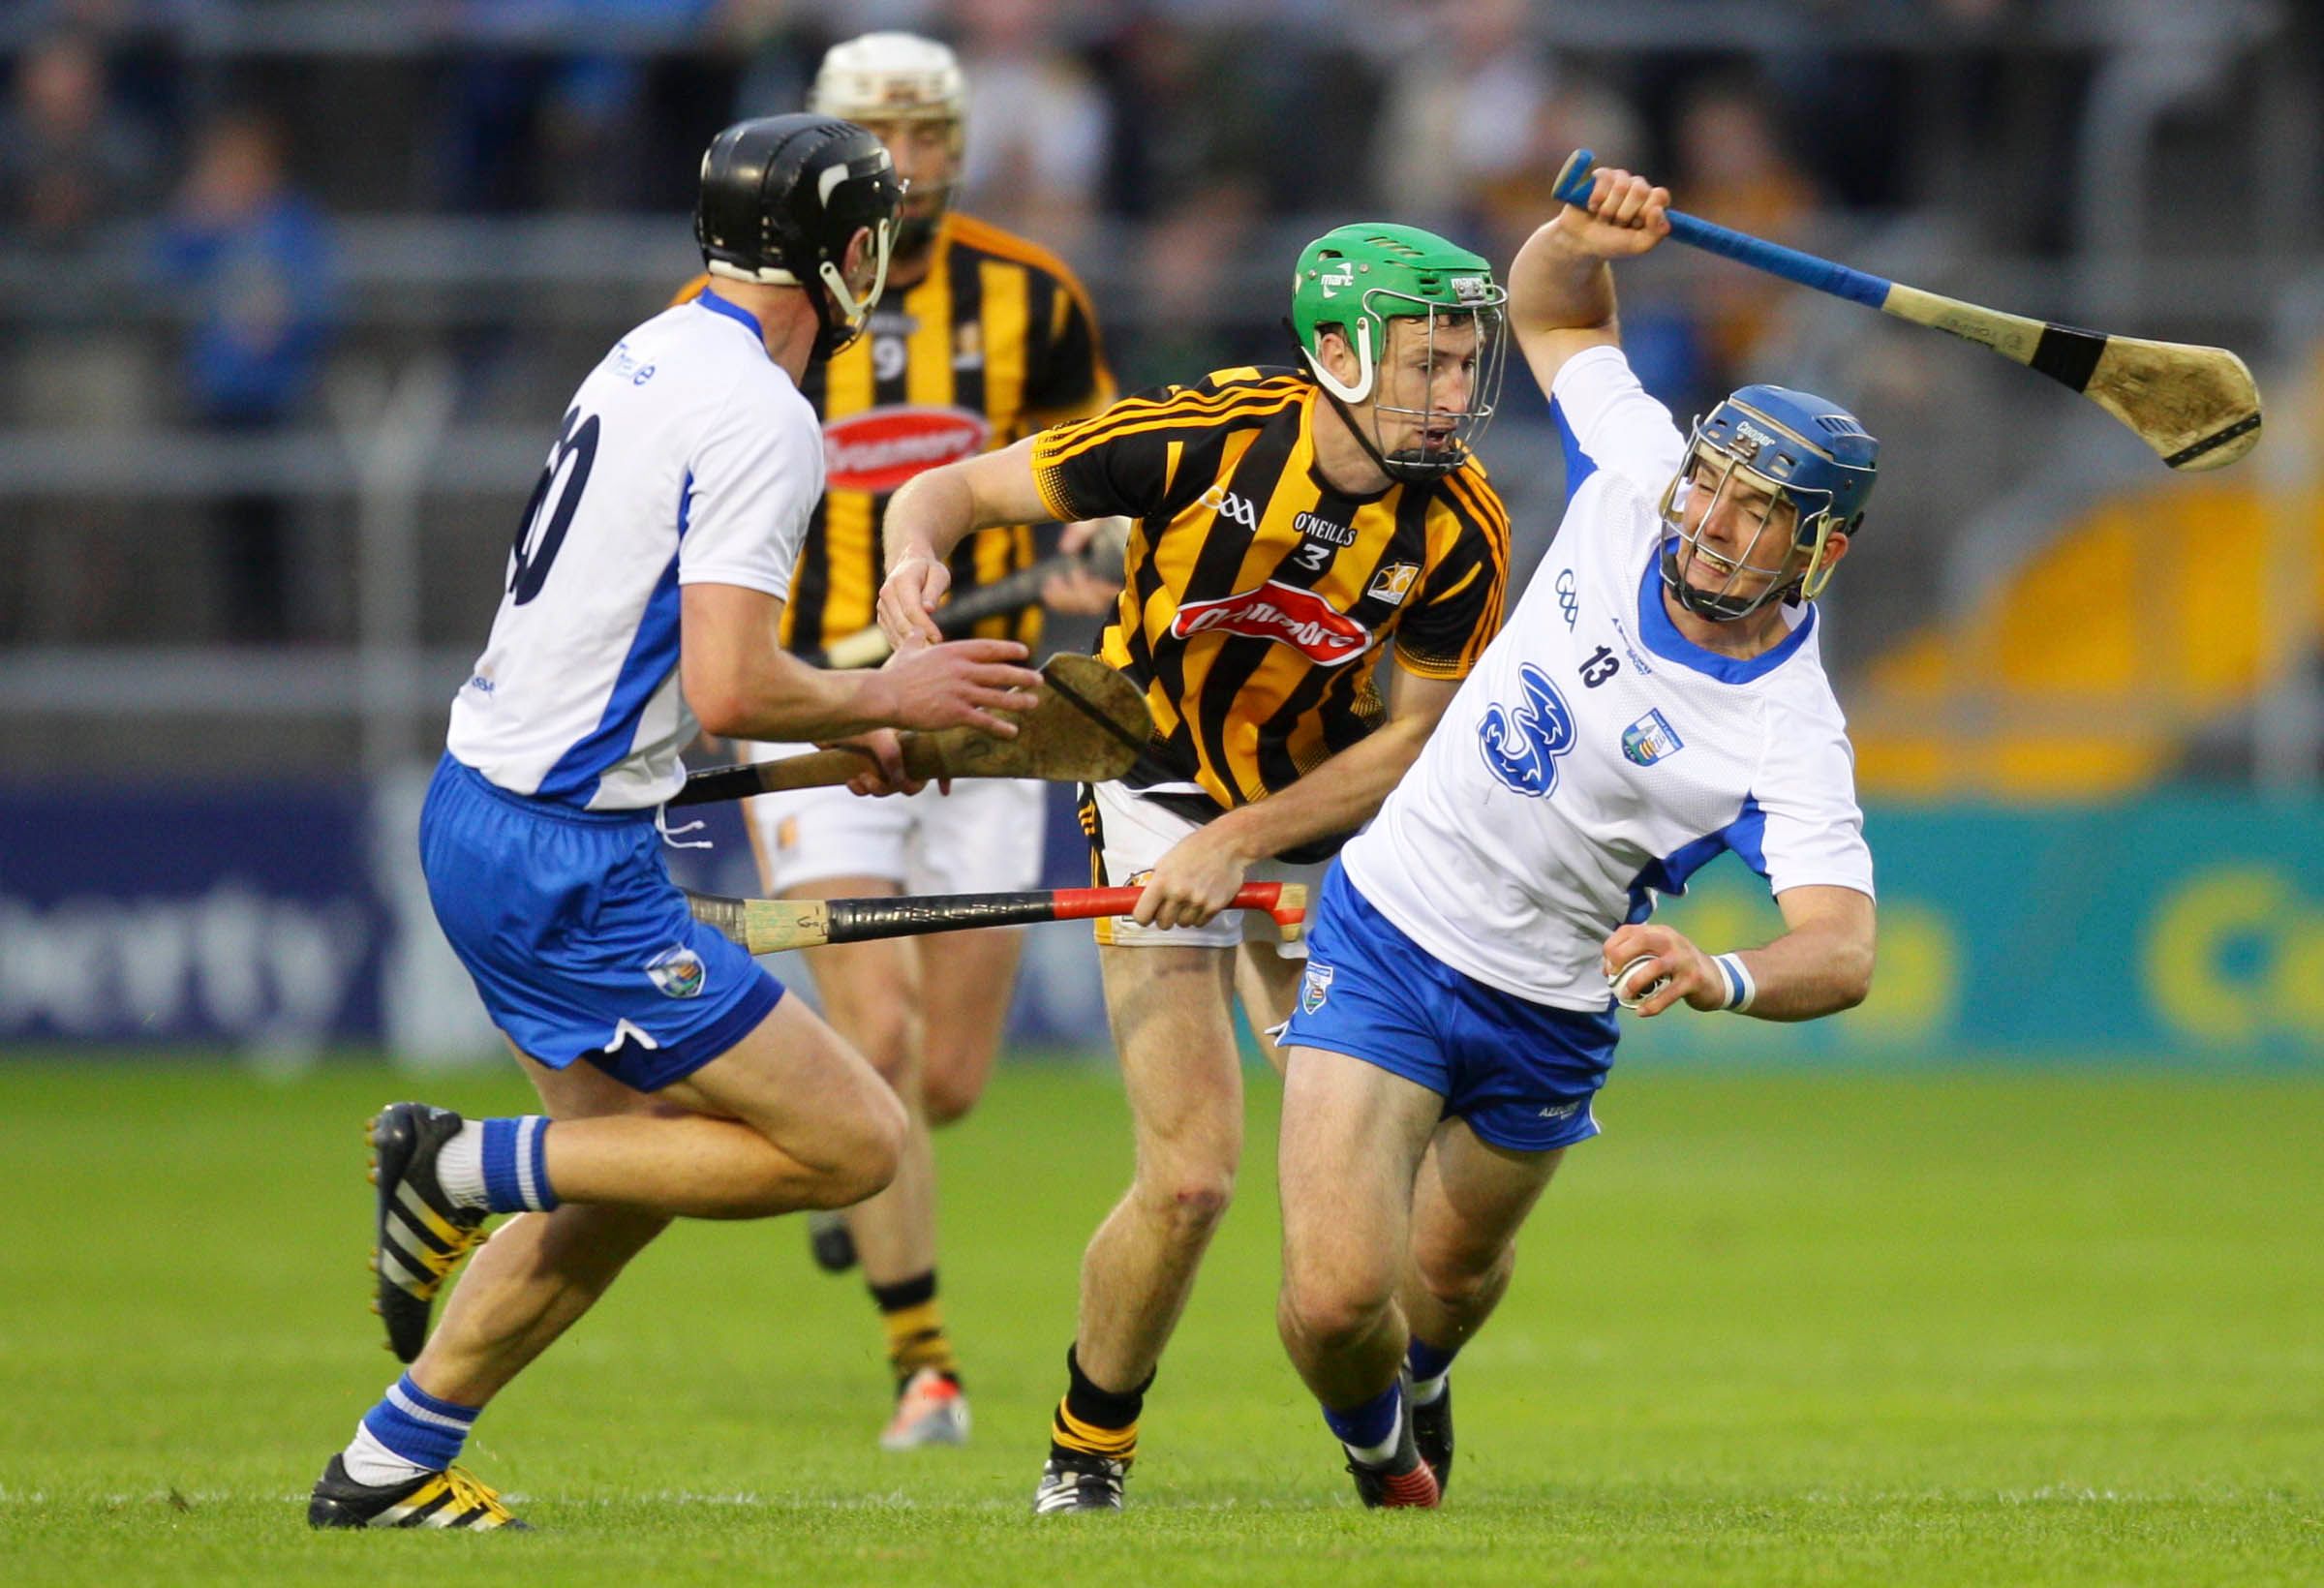 GAA All-Ireland Senior Hurling Championship Semi-Final Replay, Semple Stadium, Tipperary 13/8/2016 Kilkenny vs Waterford Waterford’s Patrick Curran is tackled by Kilkenny’s Joey Holden Mandatory Credit ©INPHO/Ken Sutton